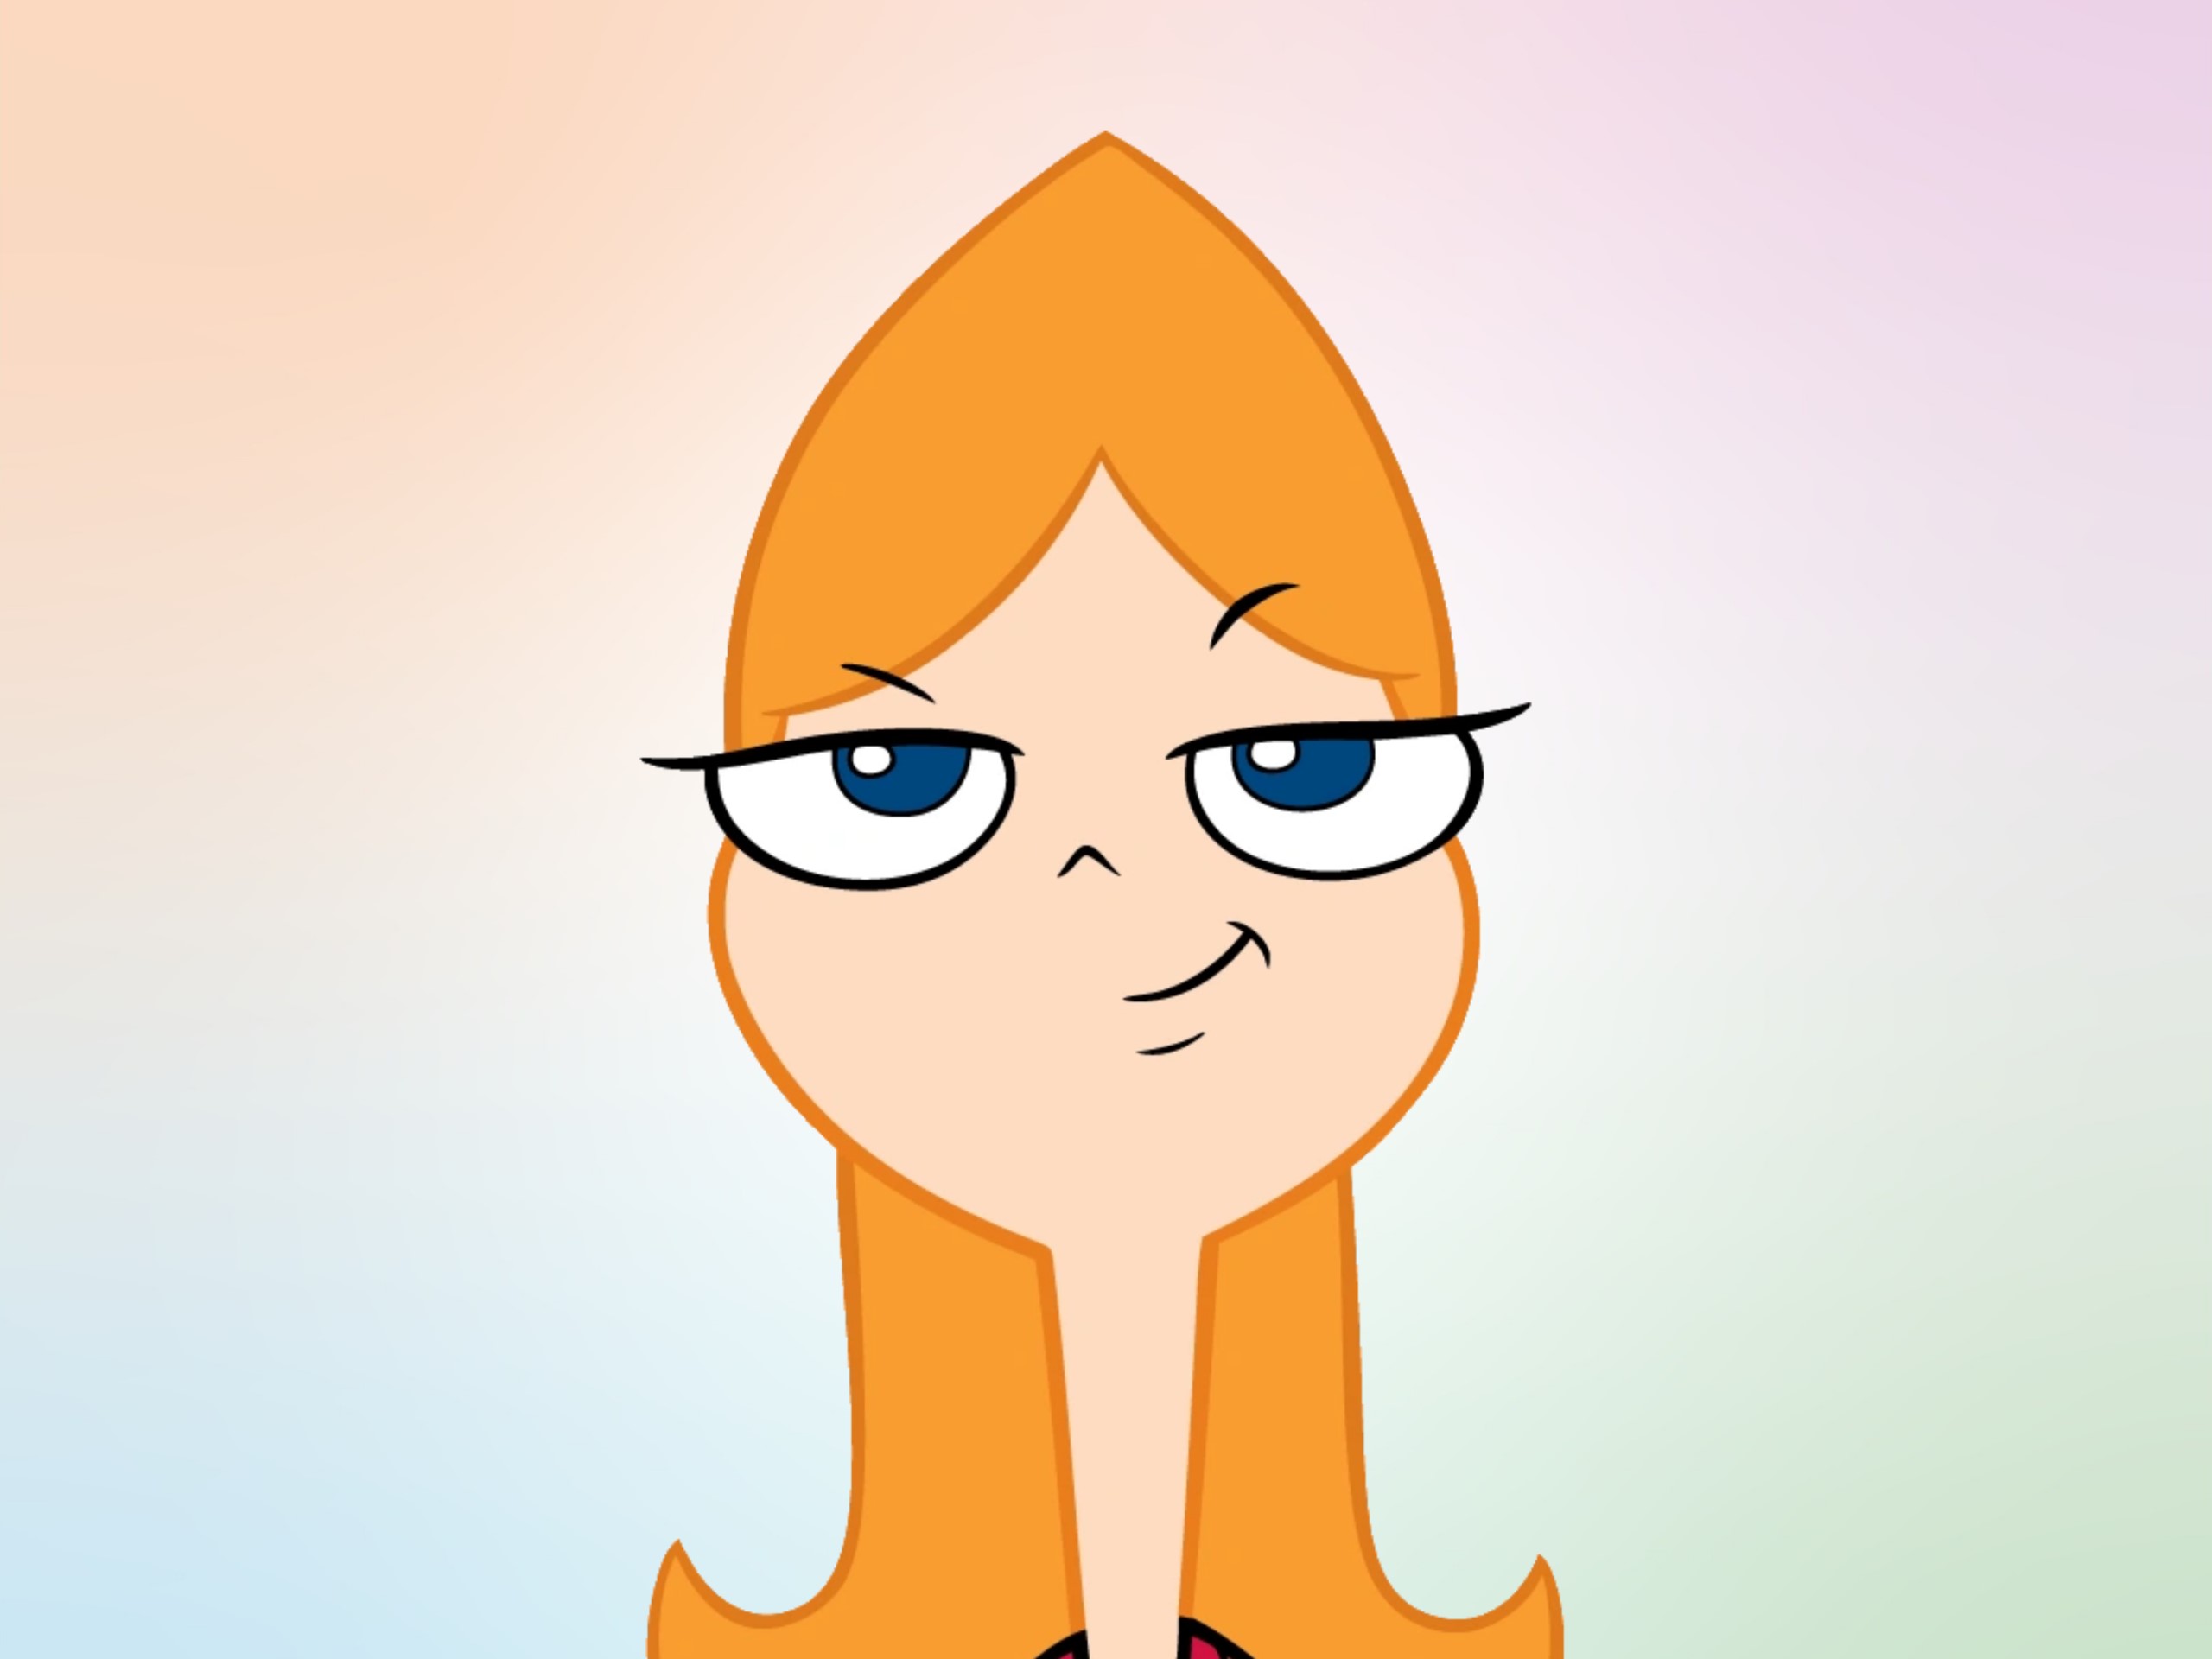 Phineas and ferb candace flynn